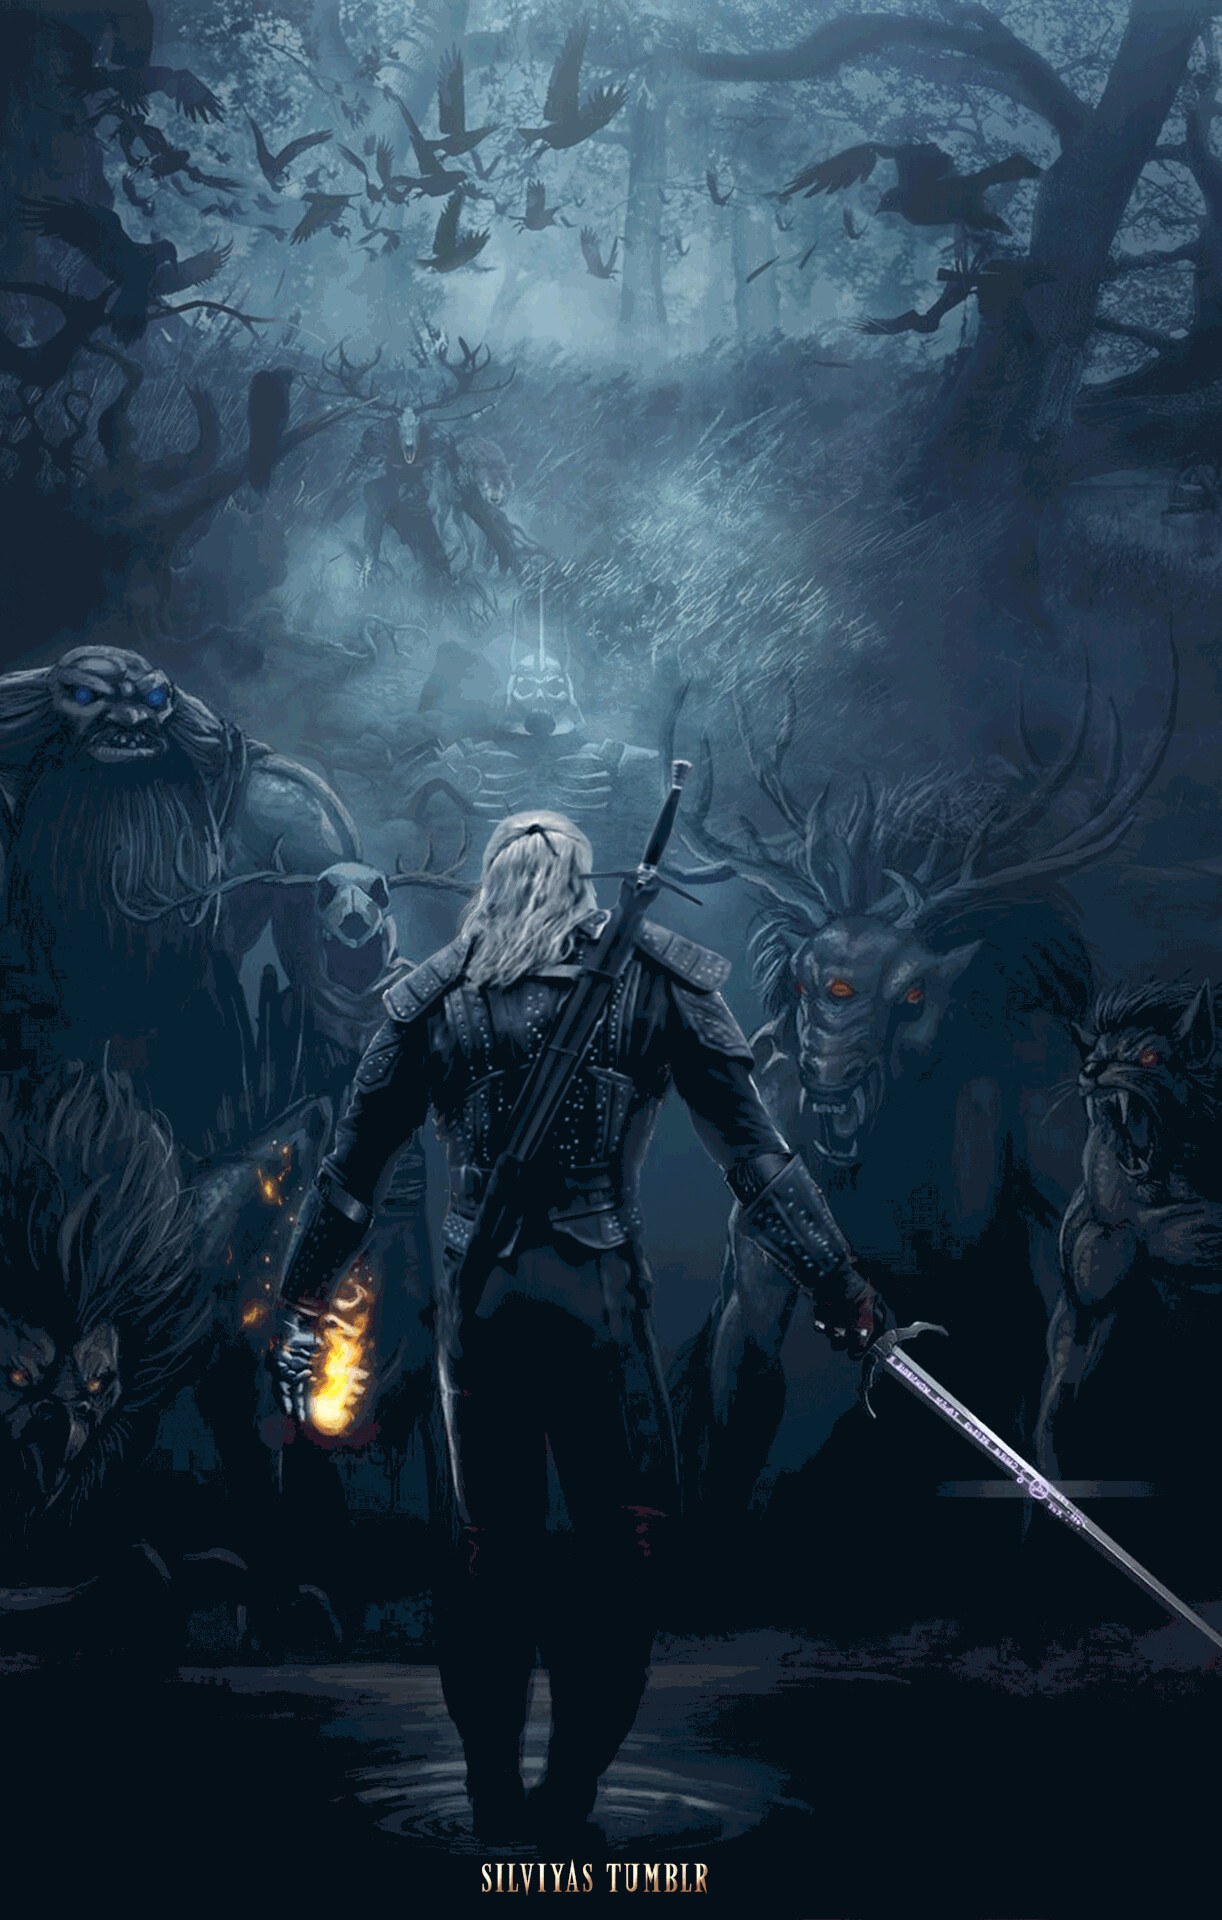 The Witcher (Game): A magical mutant made for hunting and killing monsters, Geralt of Rivia. 1230x1920 HD Wallpaper.